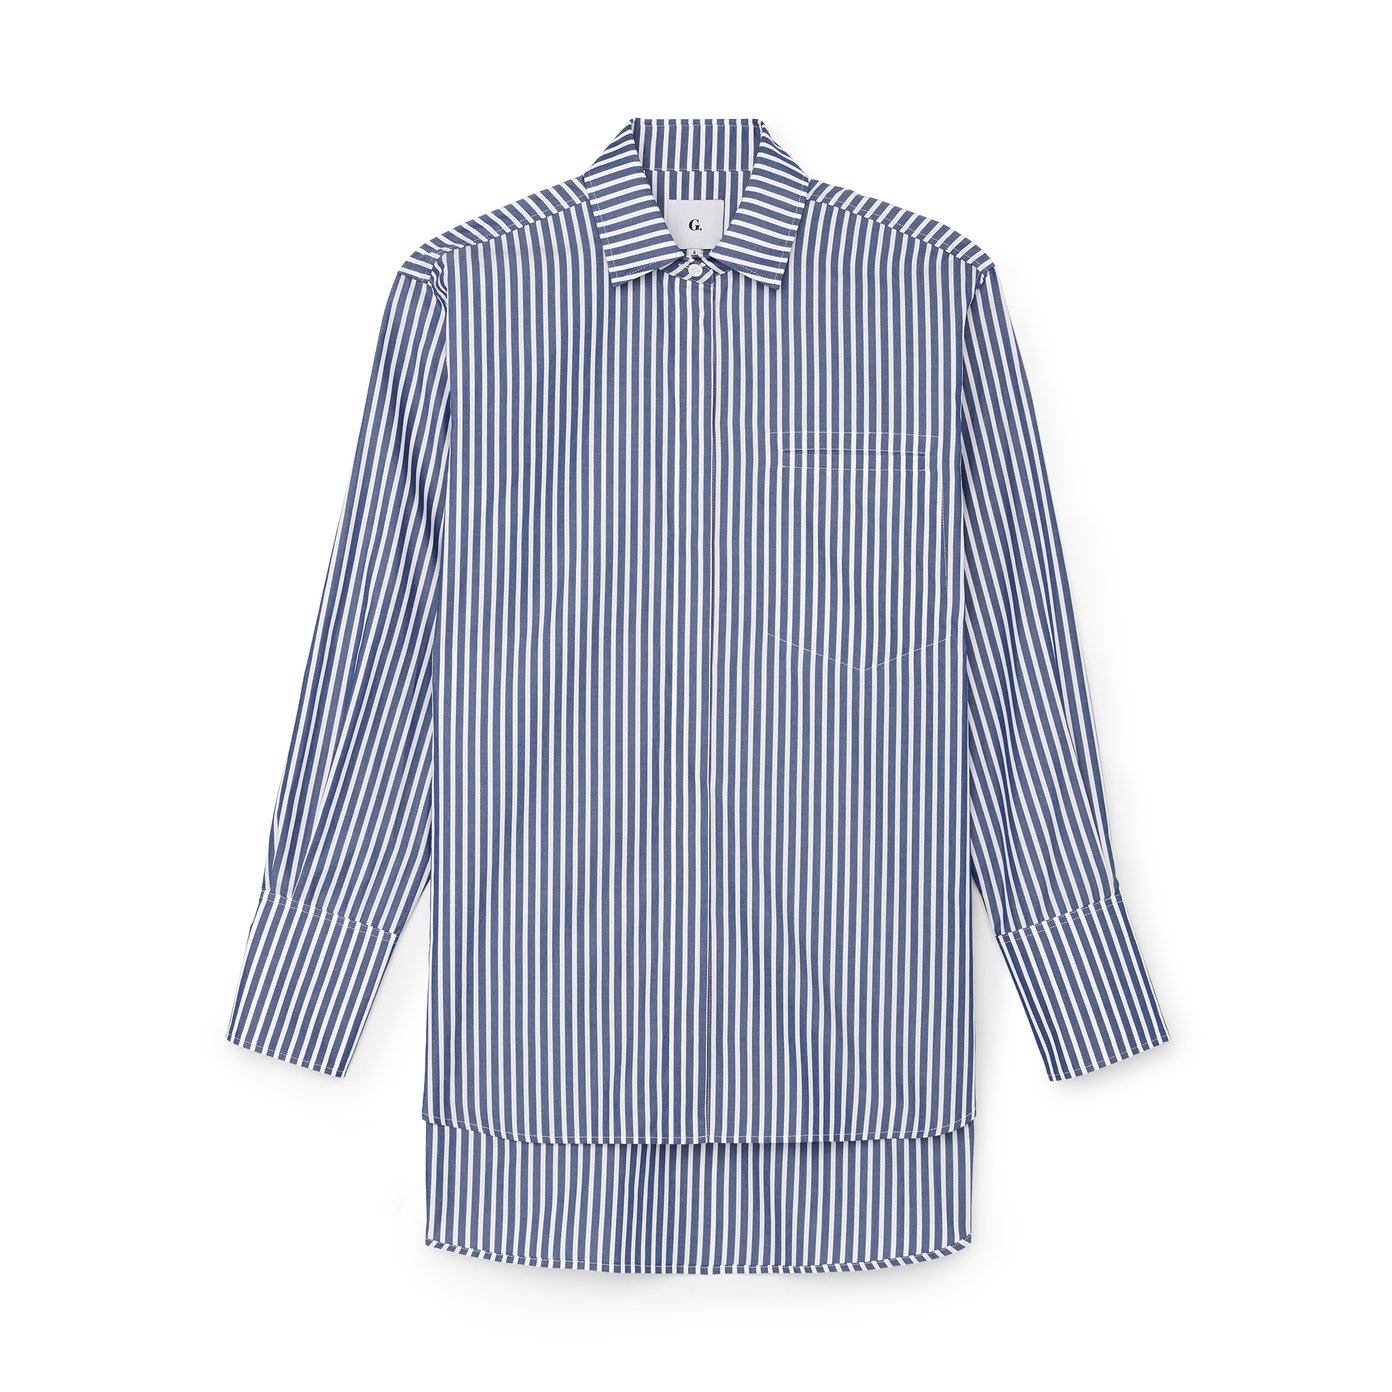 G. Label by goop Fabian Striped Button-Up Shirt